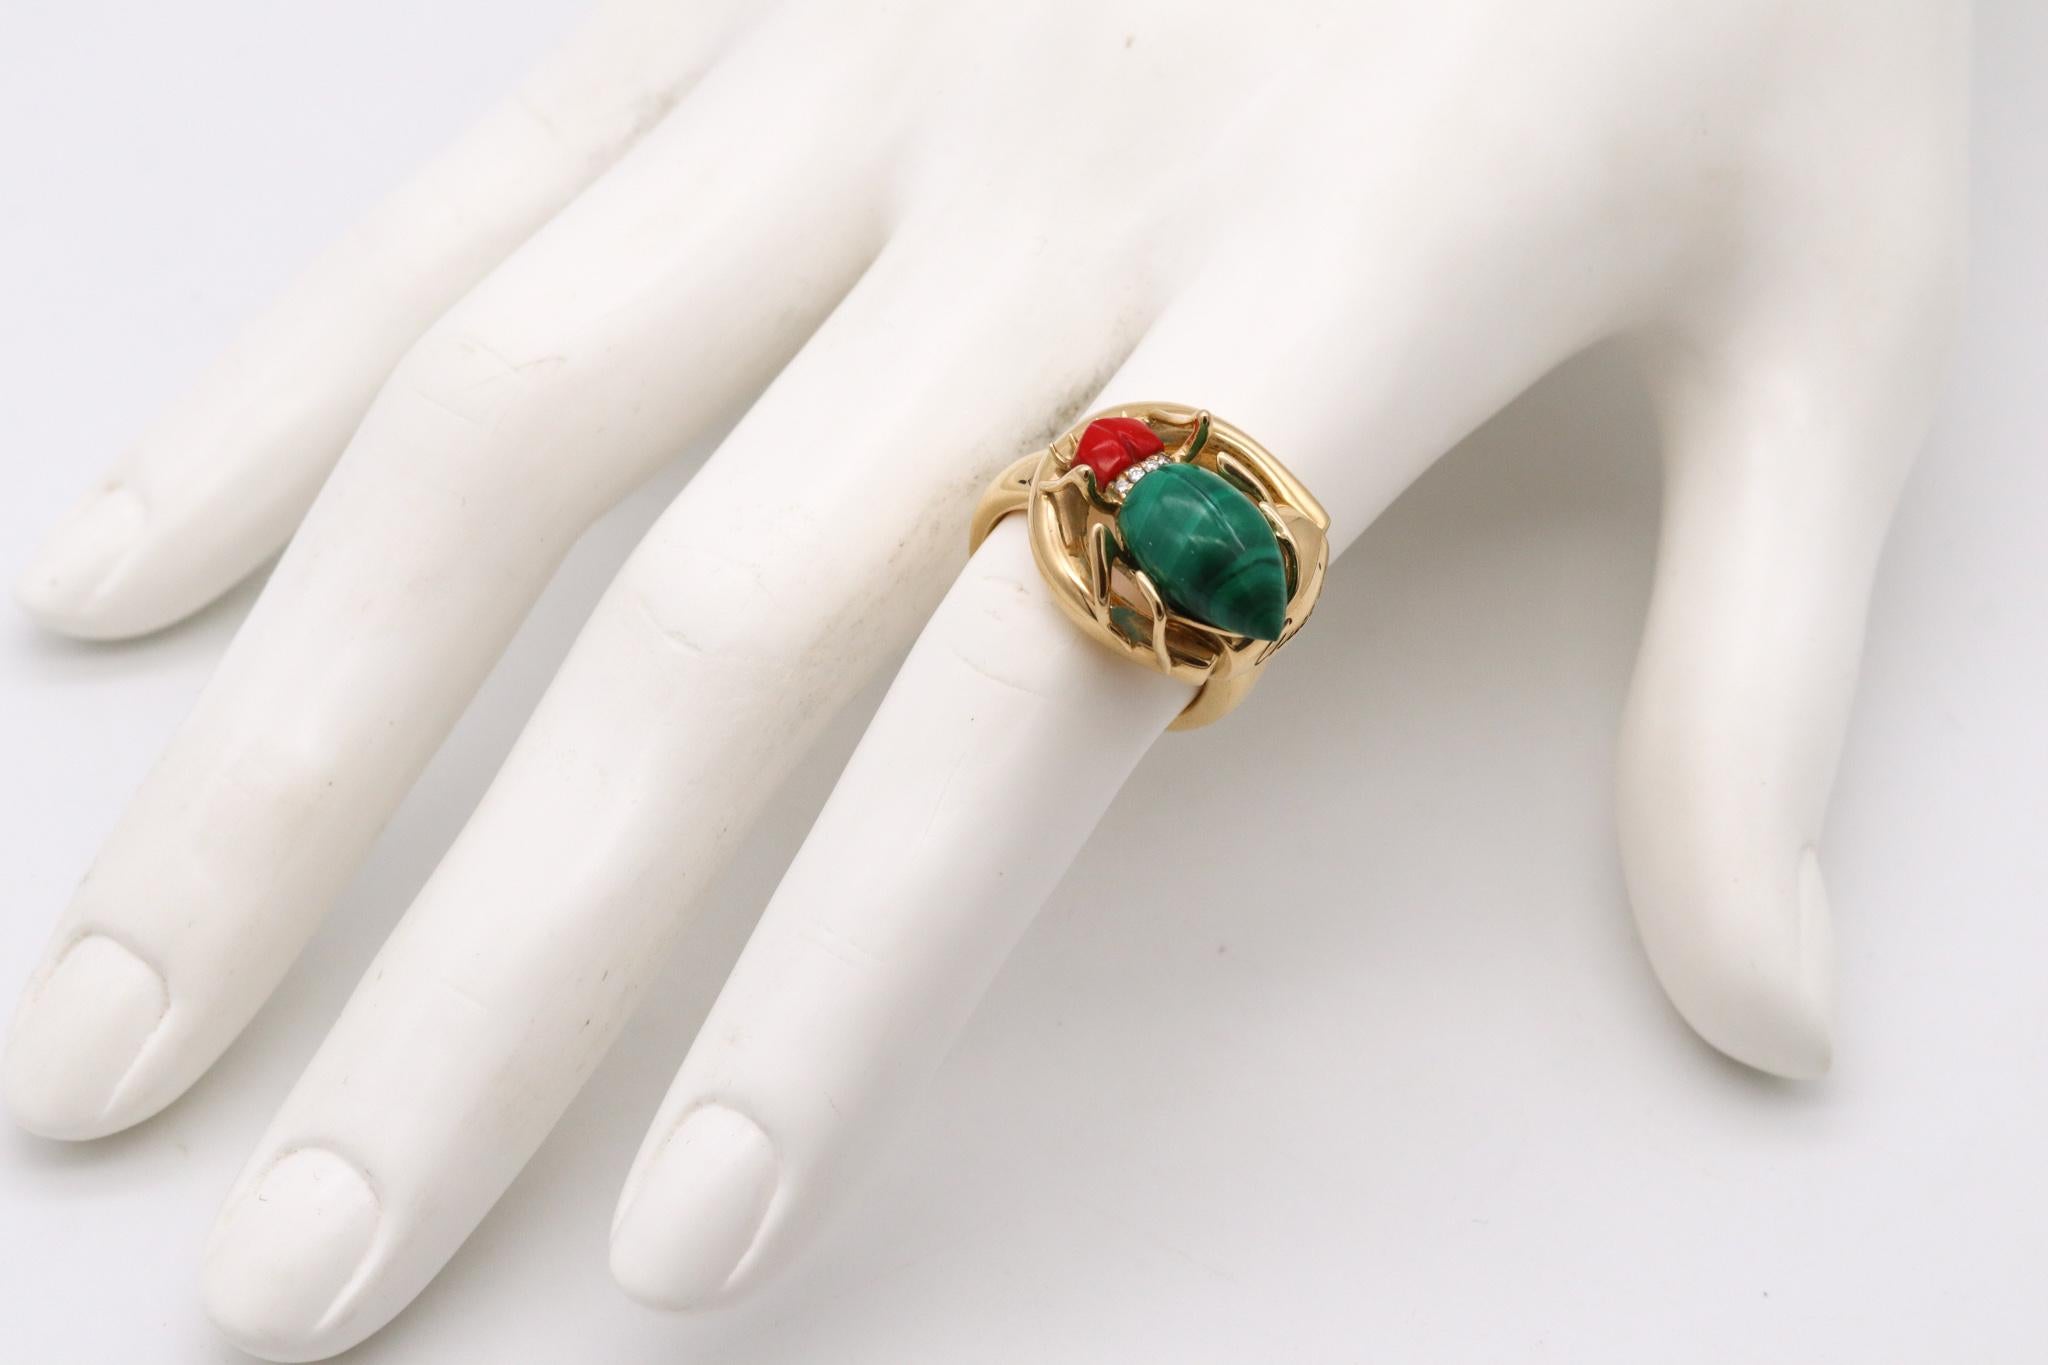 Youthful horse-bit Beetle ring designed by Gucci.

A vintage playful piece made in Italy in very limited edition. This ring is part of the horse-bit beetles collection, crafted in solid 18 karats of high polished yellow gold. 

Featuring one jeweled